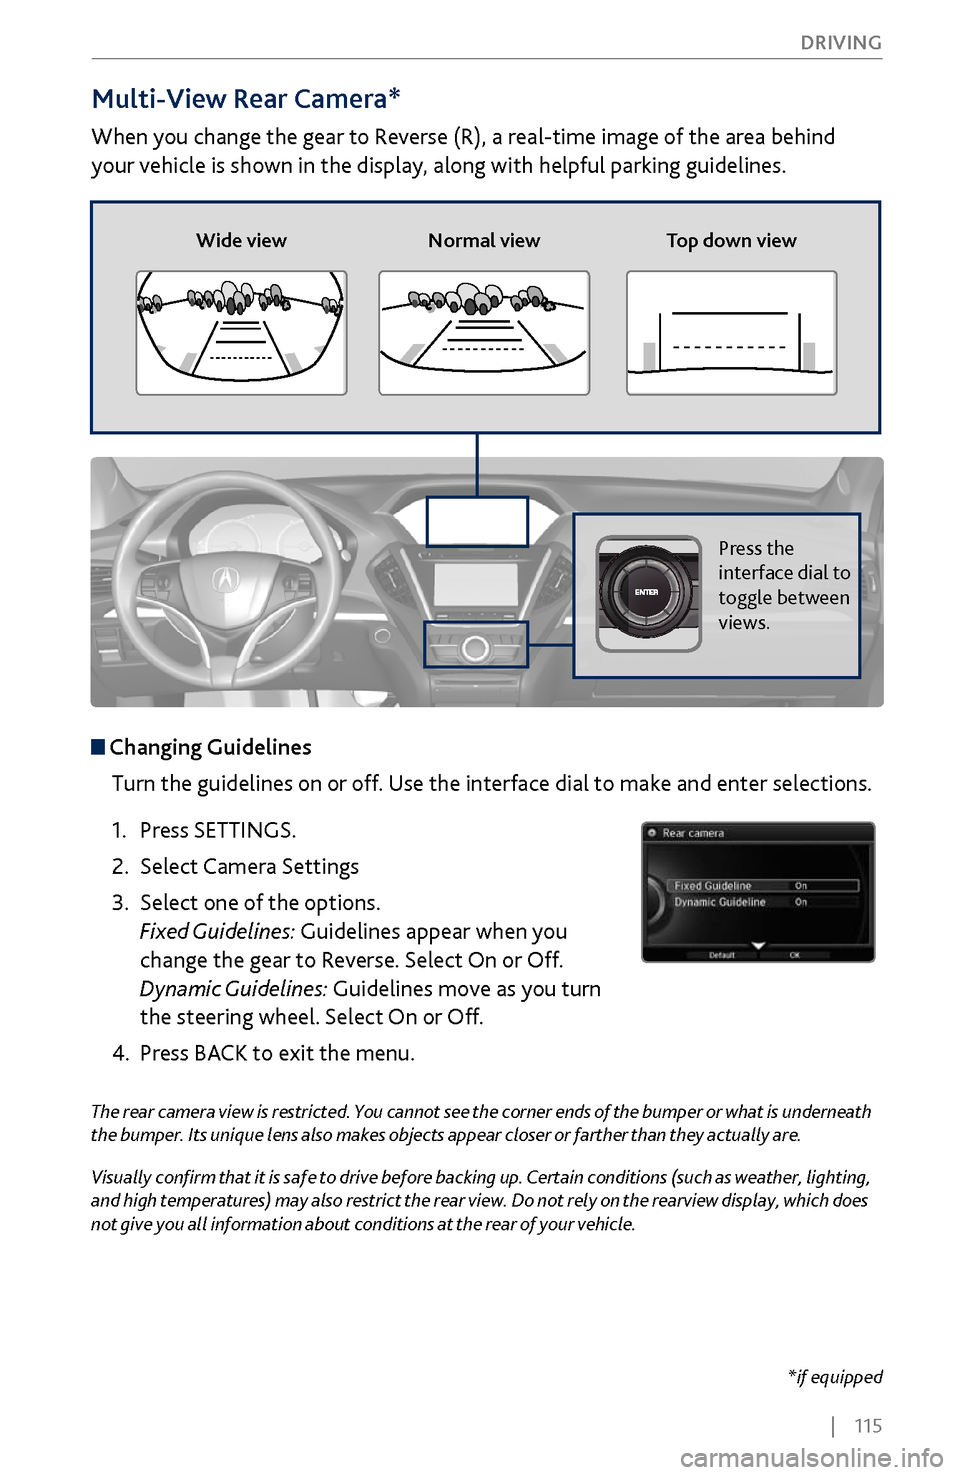 Acura MDX 2017  Owners Guide |    115
       DRIVING
Multi-View Rear Camera*
When you change the gear to Reverse (R), a real-time image of the area behind 
your vehicle is shown in the display, along with helpful parking guidelin